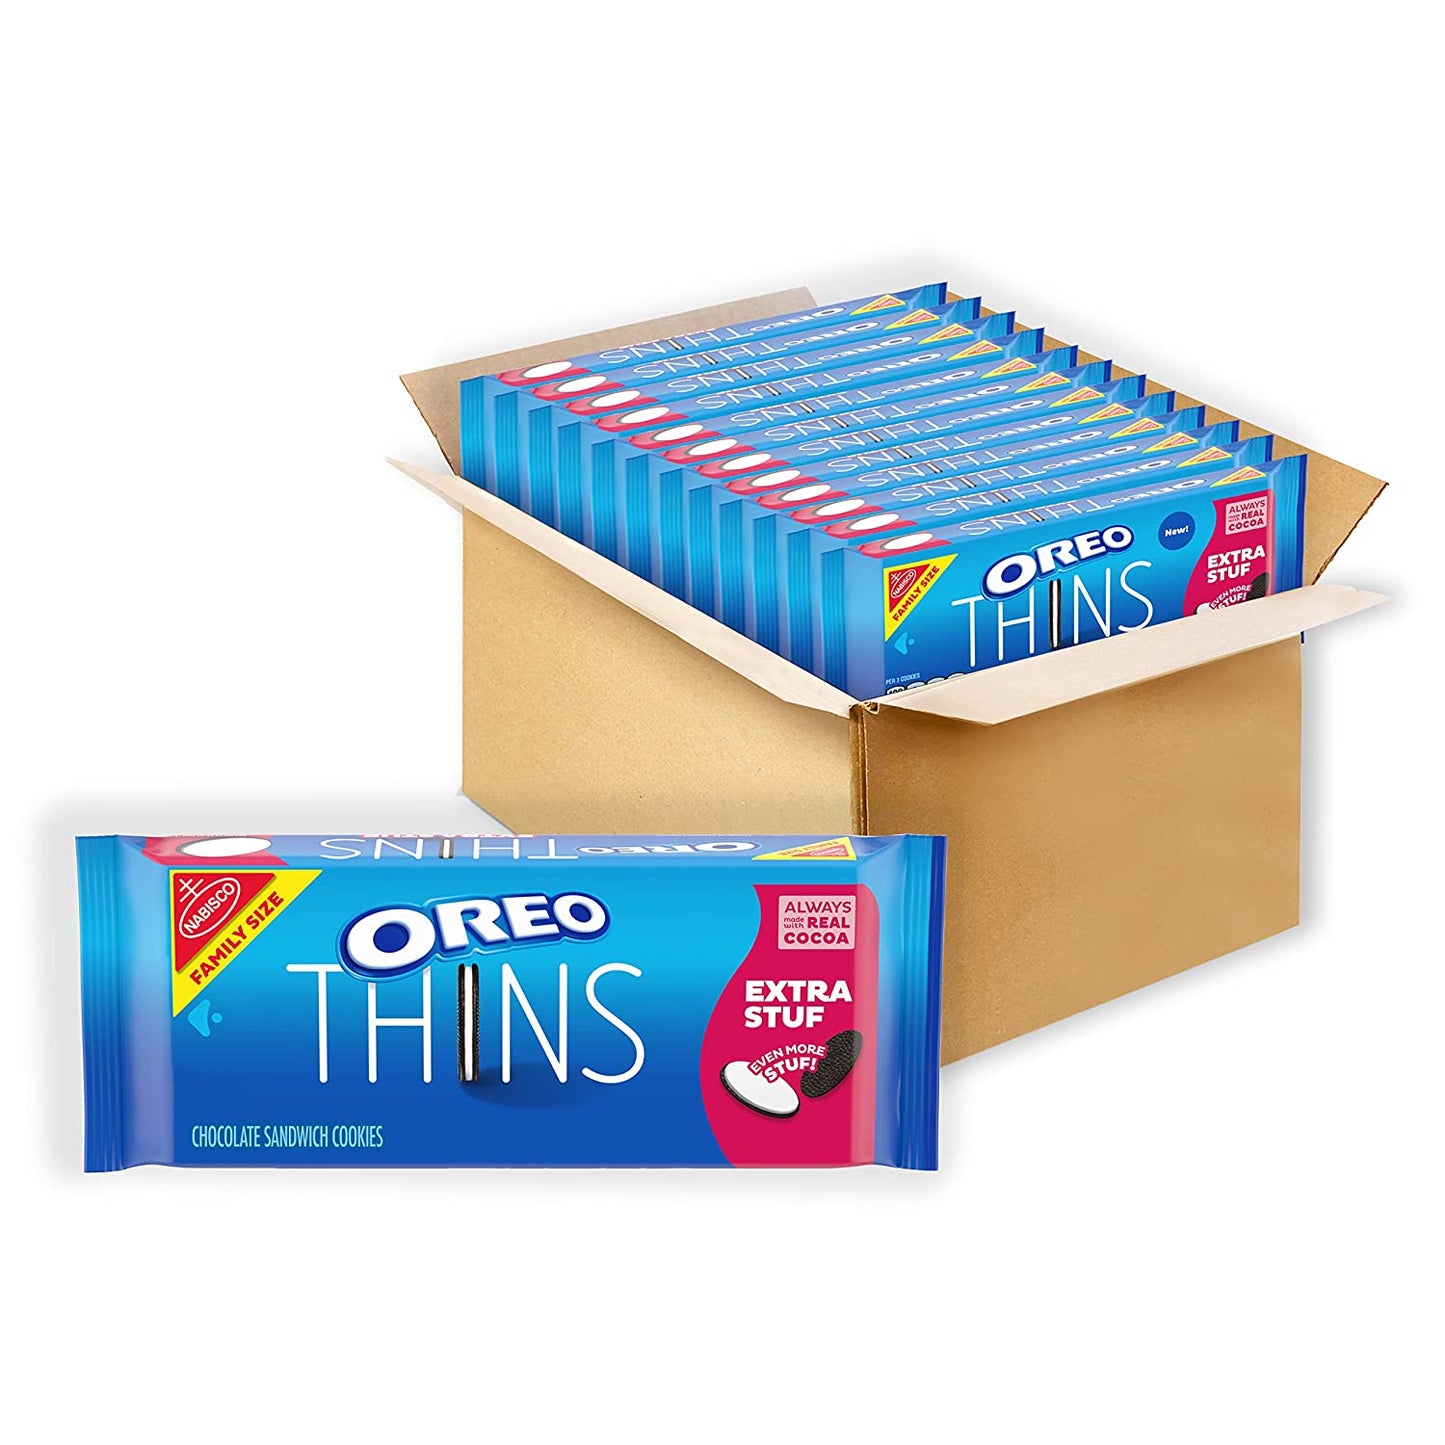 OREO Thins Extra Stuf Chocolate Sandwich Cookies, Family Size, Valentine Cookies